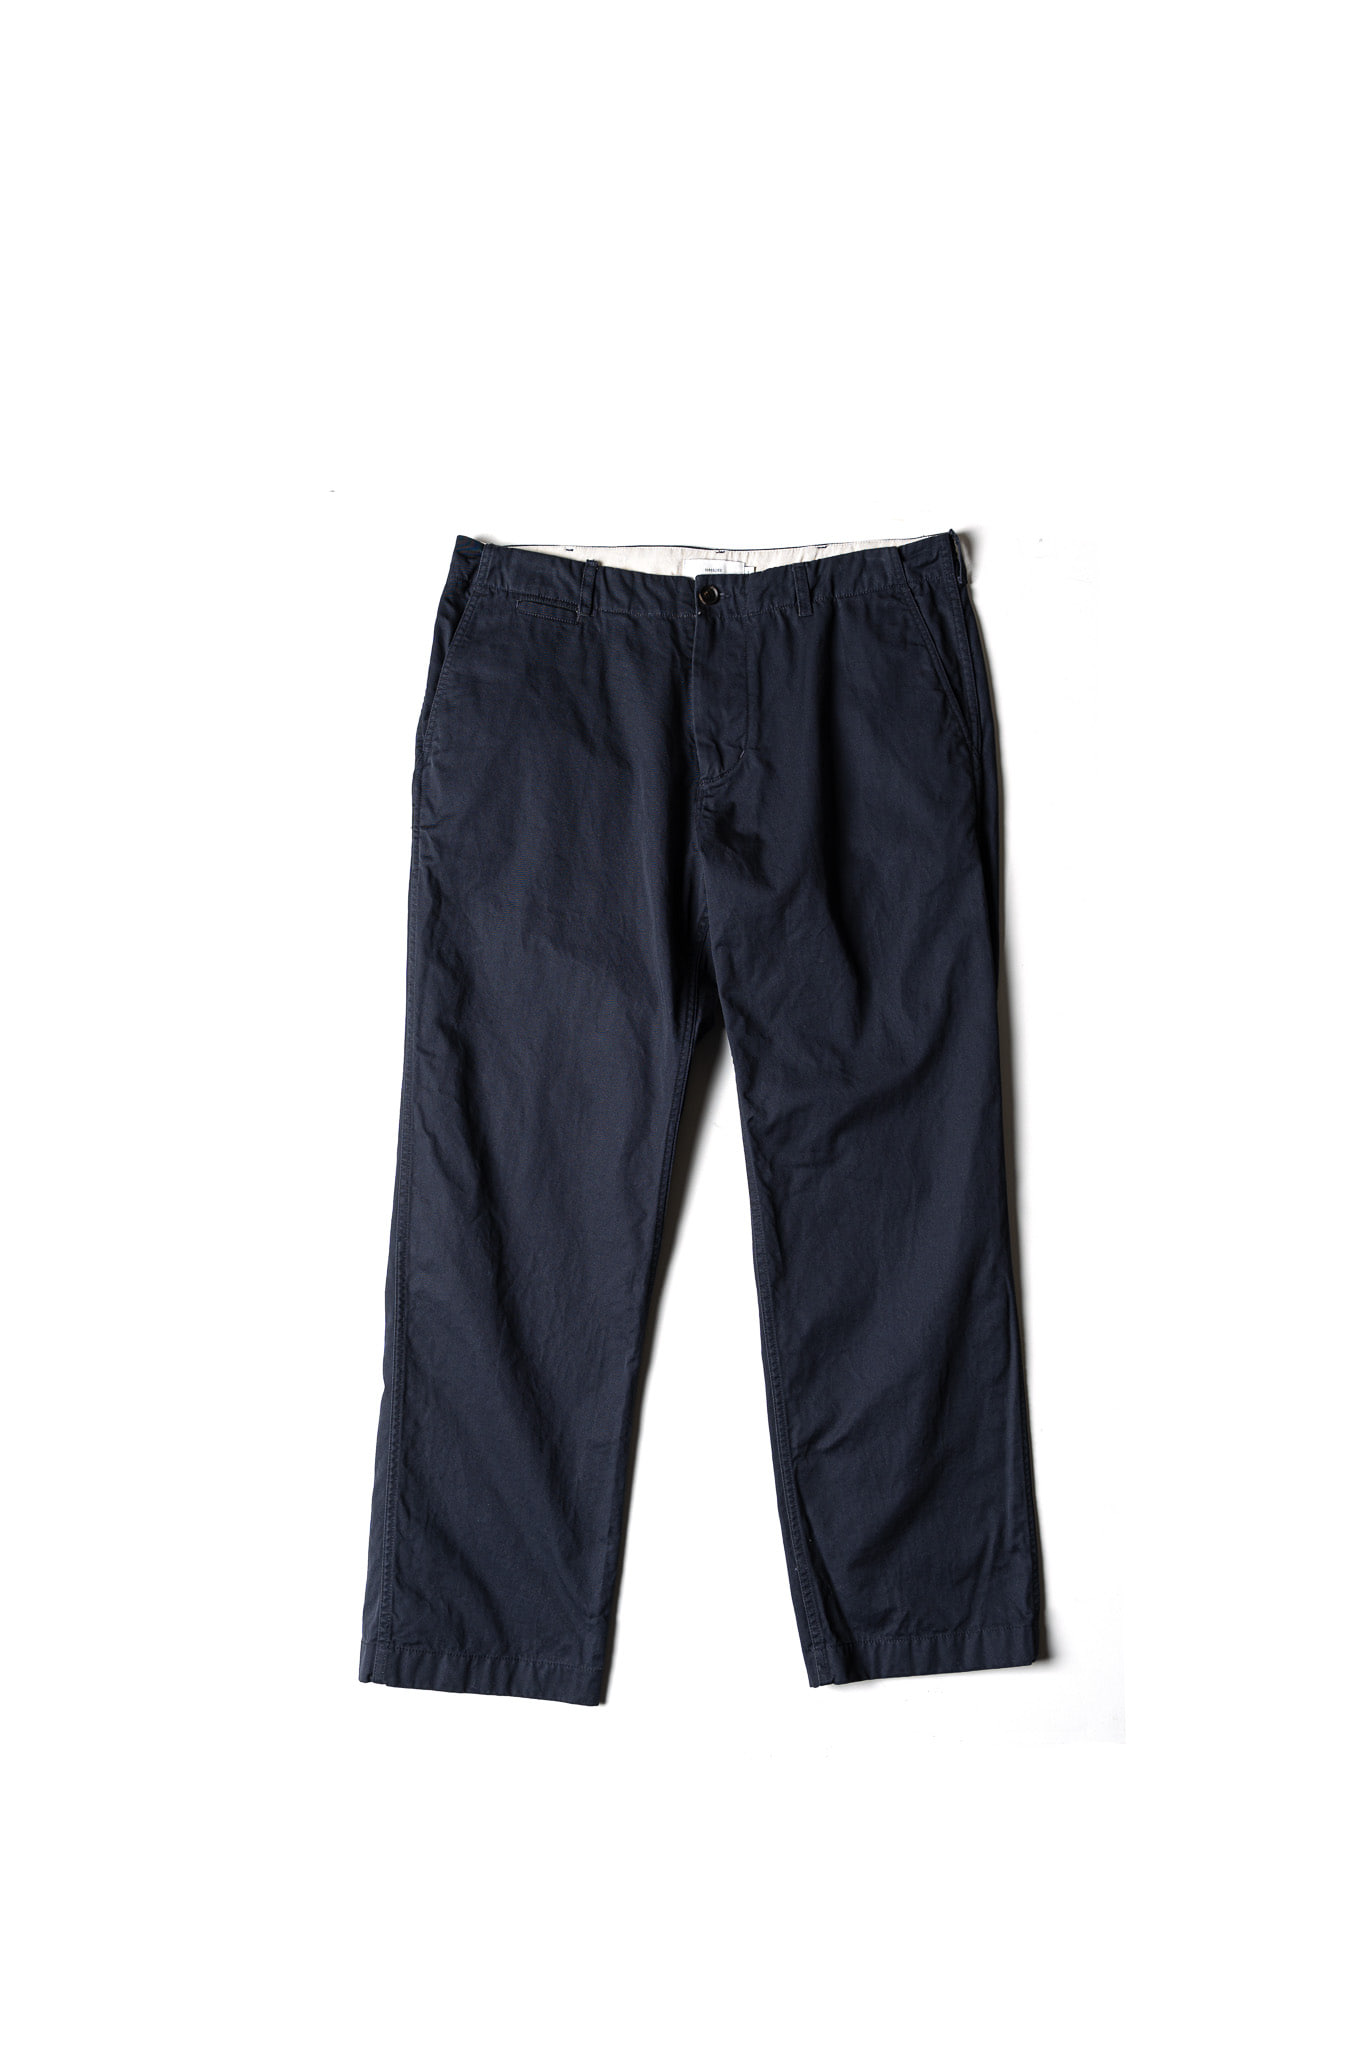 VINTAGE COTTON RELAXED CHINO PANTS (navy)